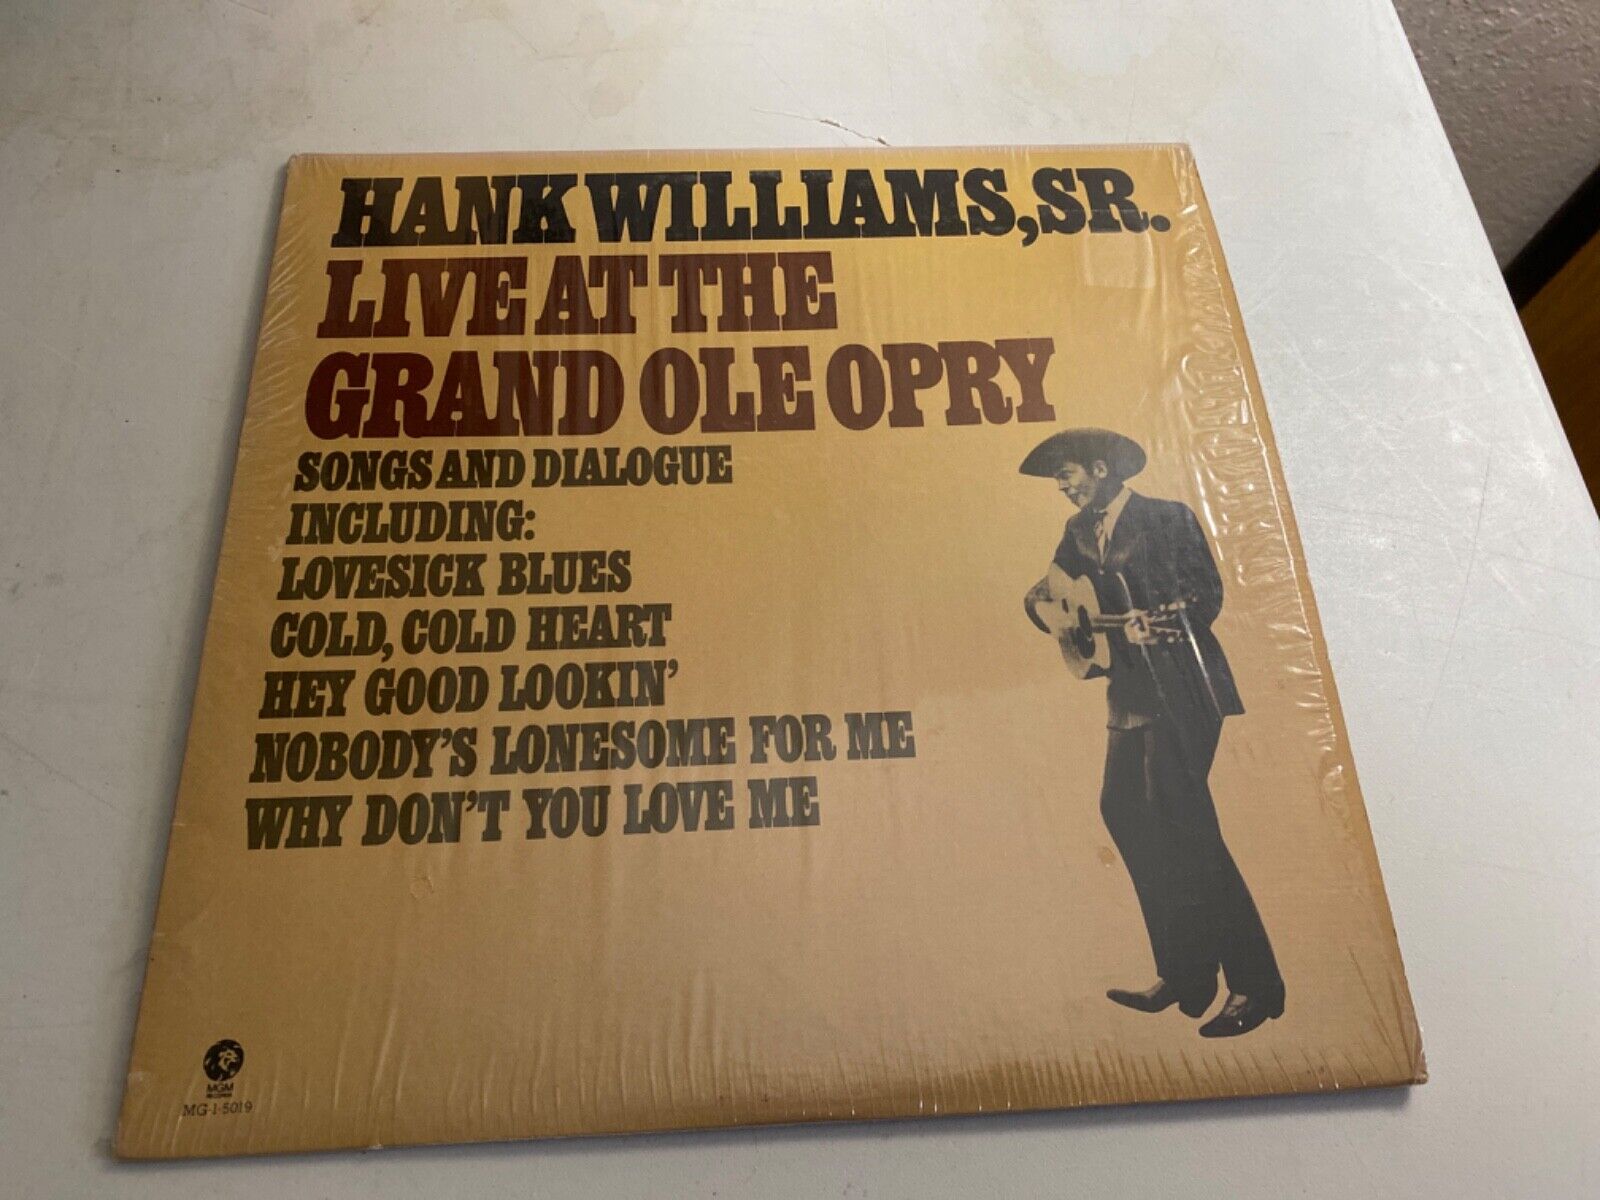 HANK WILLIAMS – LIVE AT THE GRAND OLE OPRY VINYL LP RECORD MGM RECORDS MG-1-5019